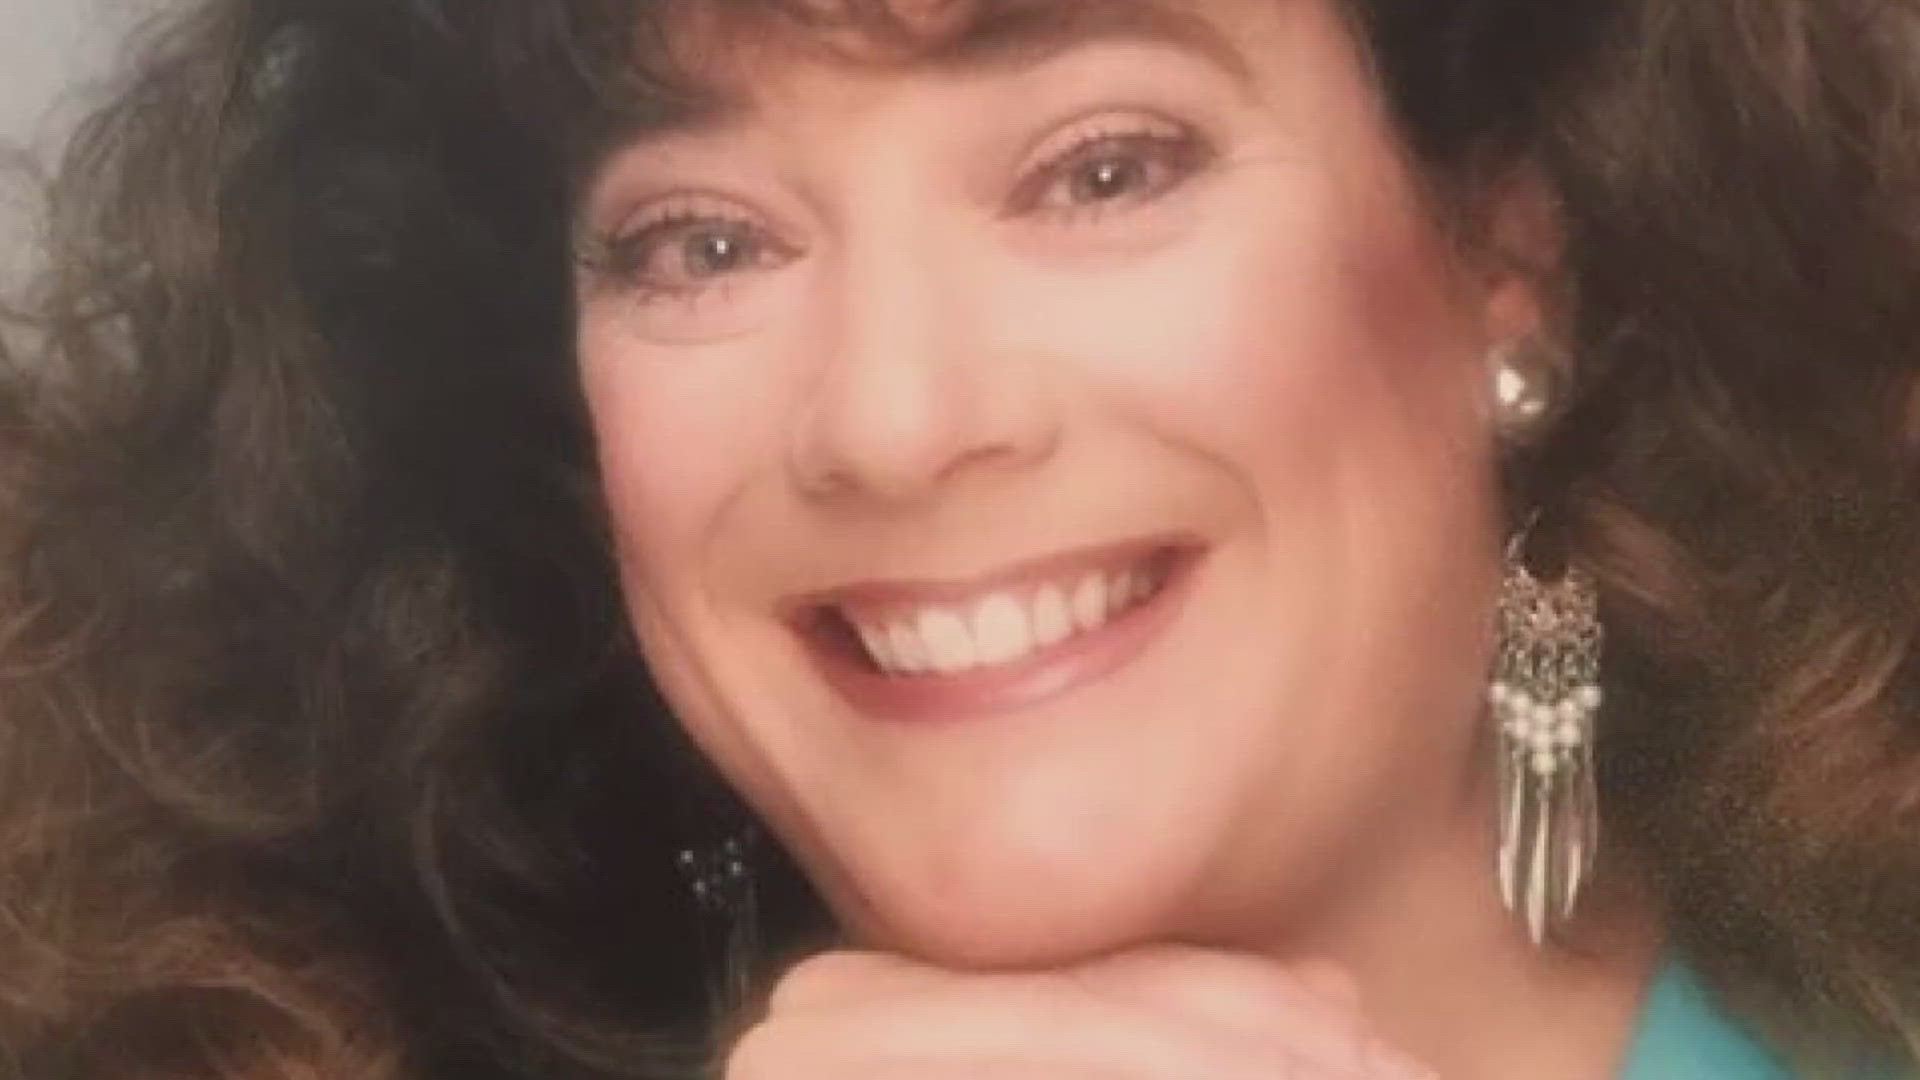 Sherry Parker's body was found in the St. Vrain River about a week after she was last seen alive.